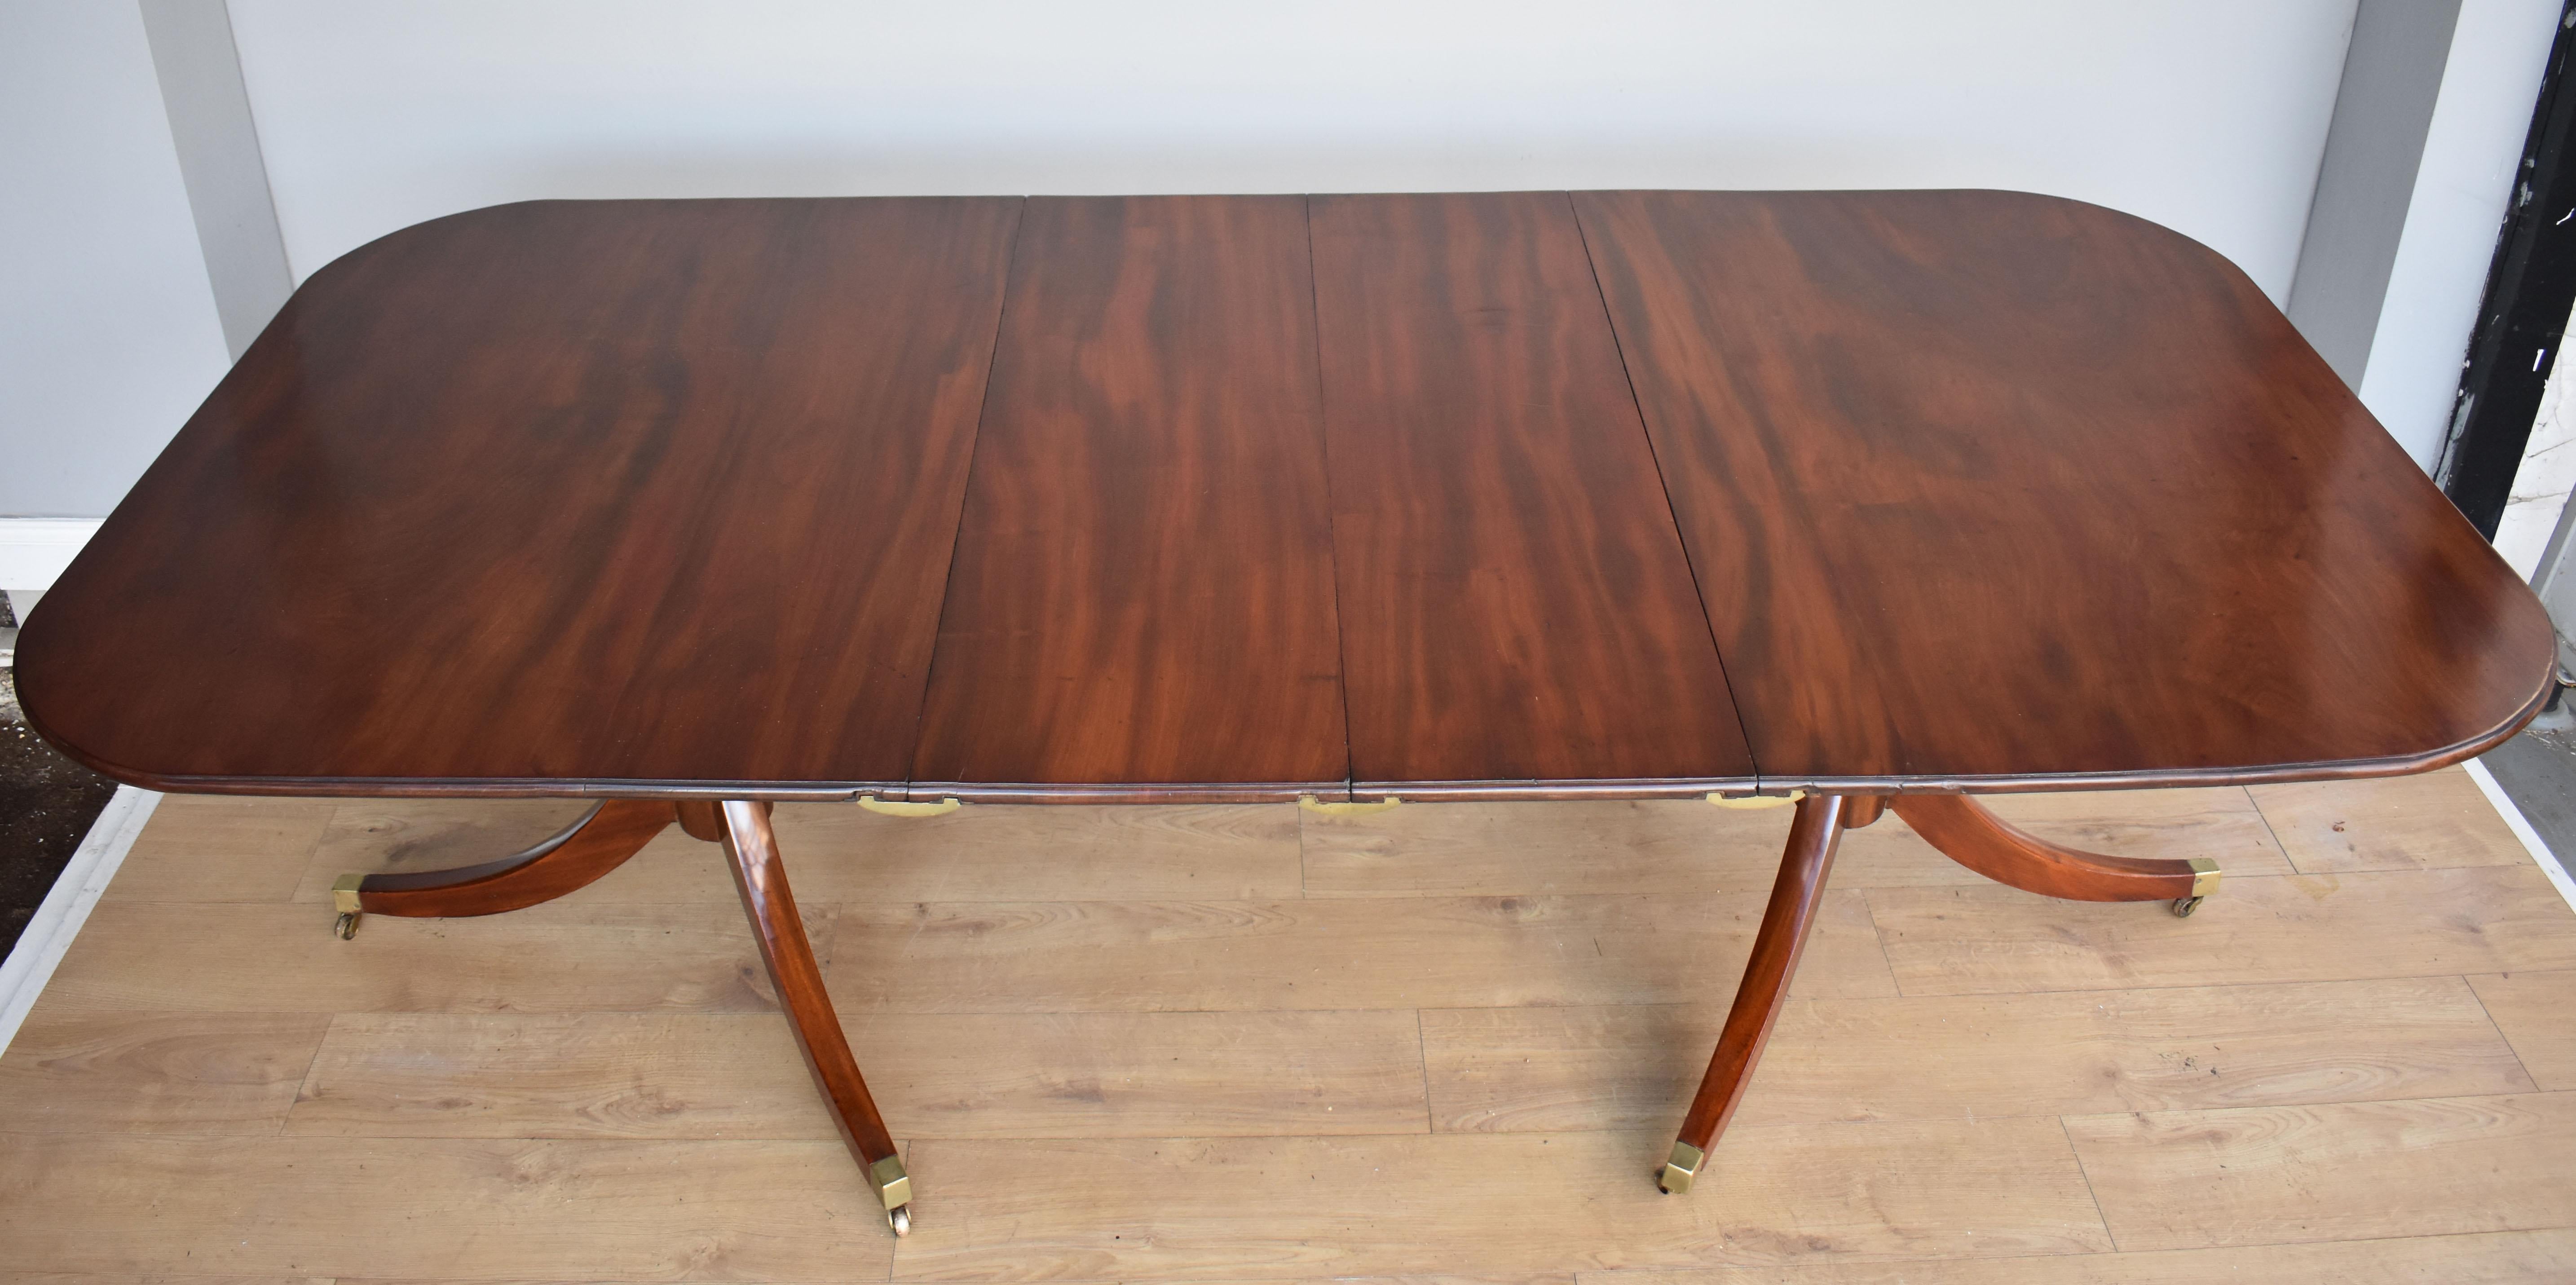 For sale is a good quality Regency style mahogany pedestal dining table. The tops being made from beautifully figured solid mahogany, the table comes complete with two additional leaves. Standing on a turned base with three splayed legs terminating